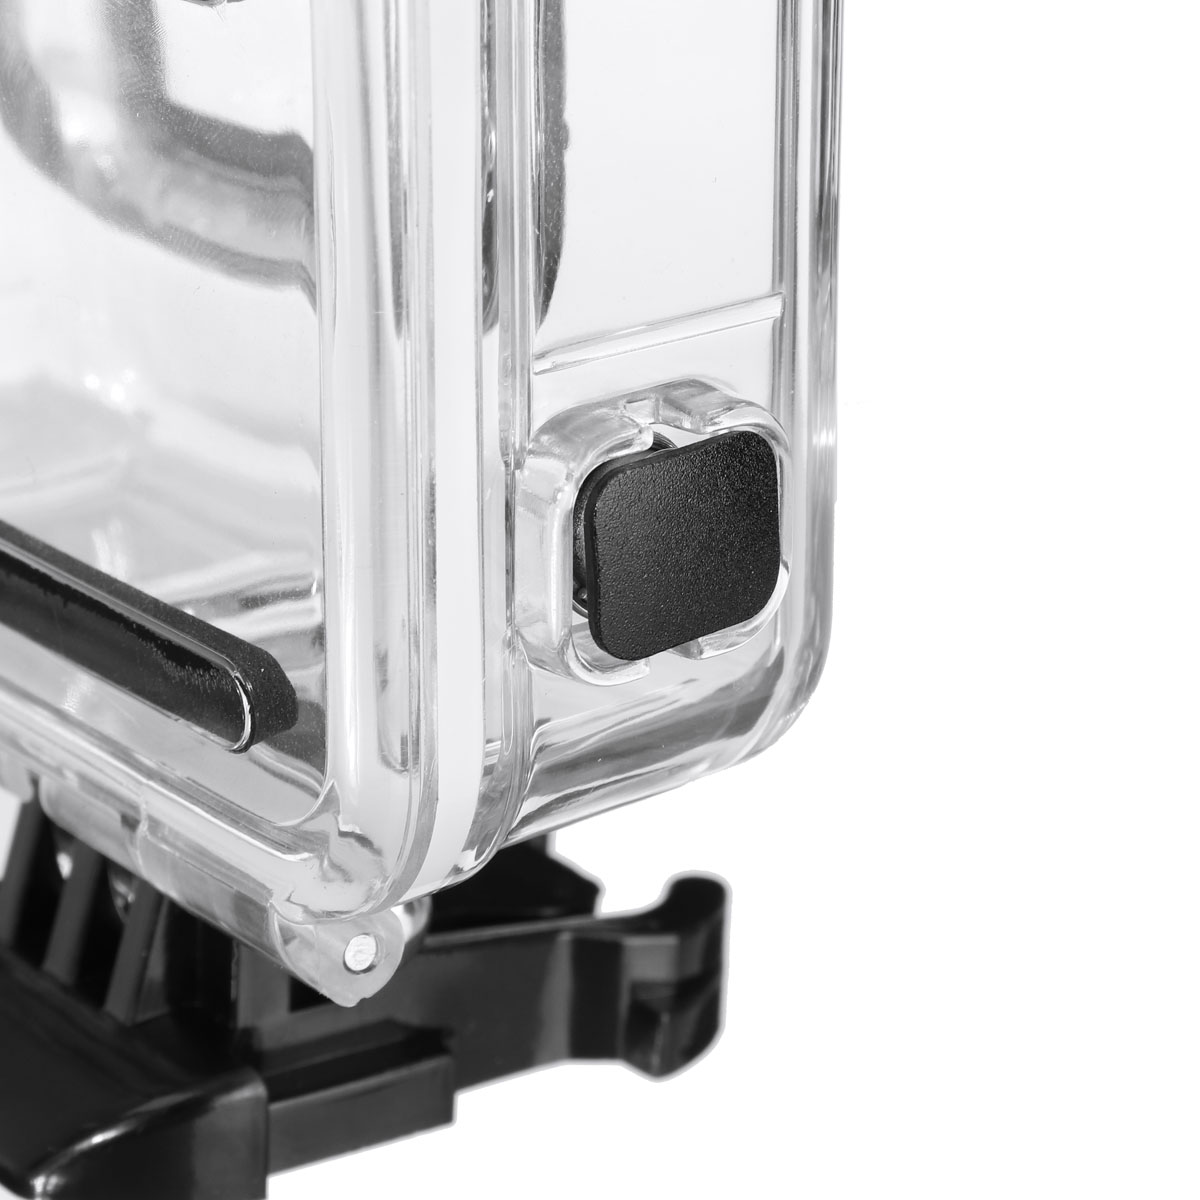 Camera-Waterproof-Housing-Case-Diving-Touch-Screen-Cover-For-Gopro-Hero-7-Silver-White-1638814